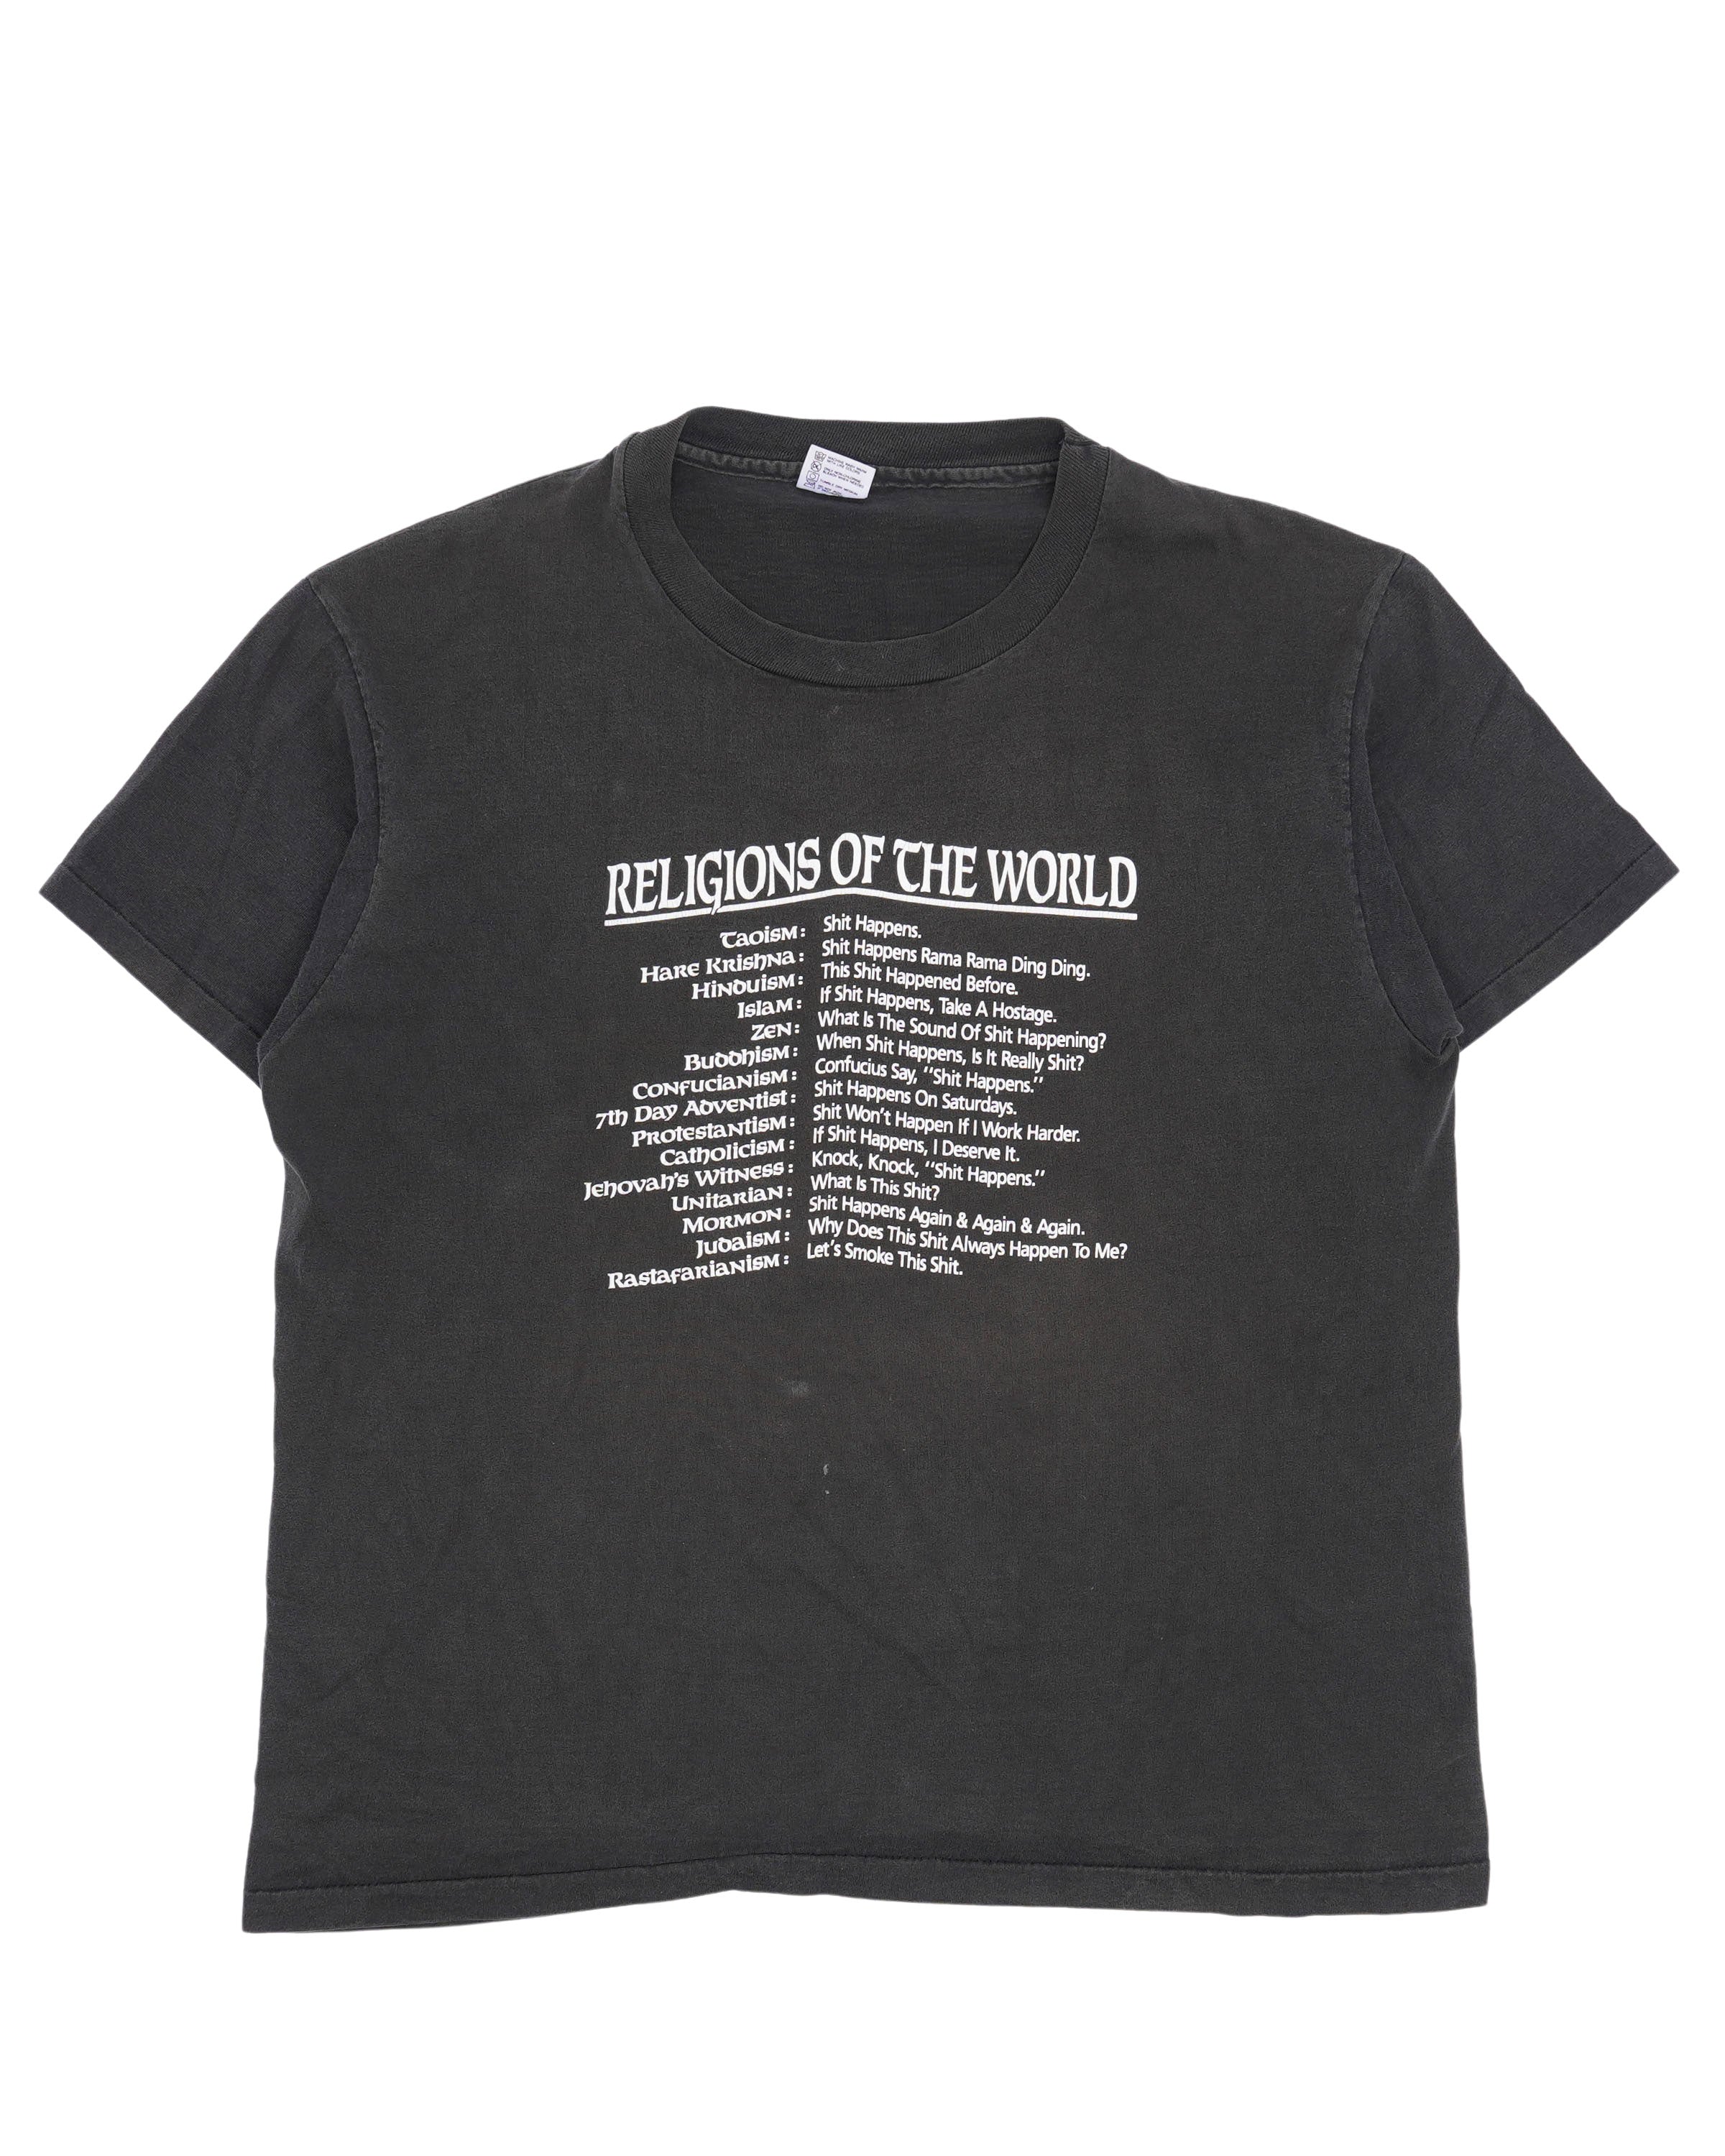 Religions of The World T-Shirt